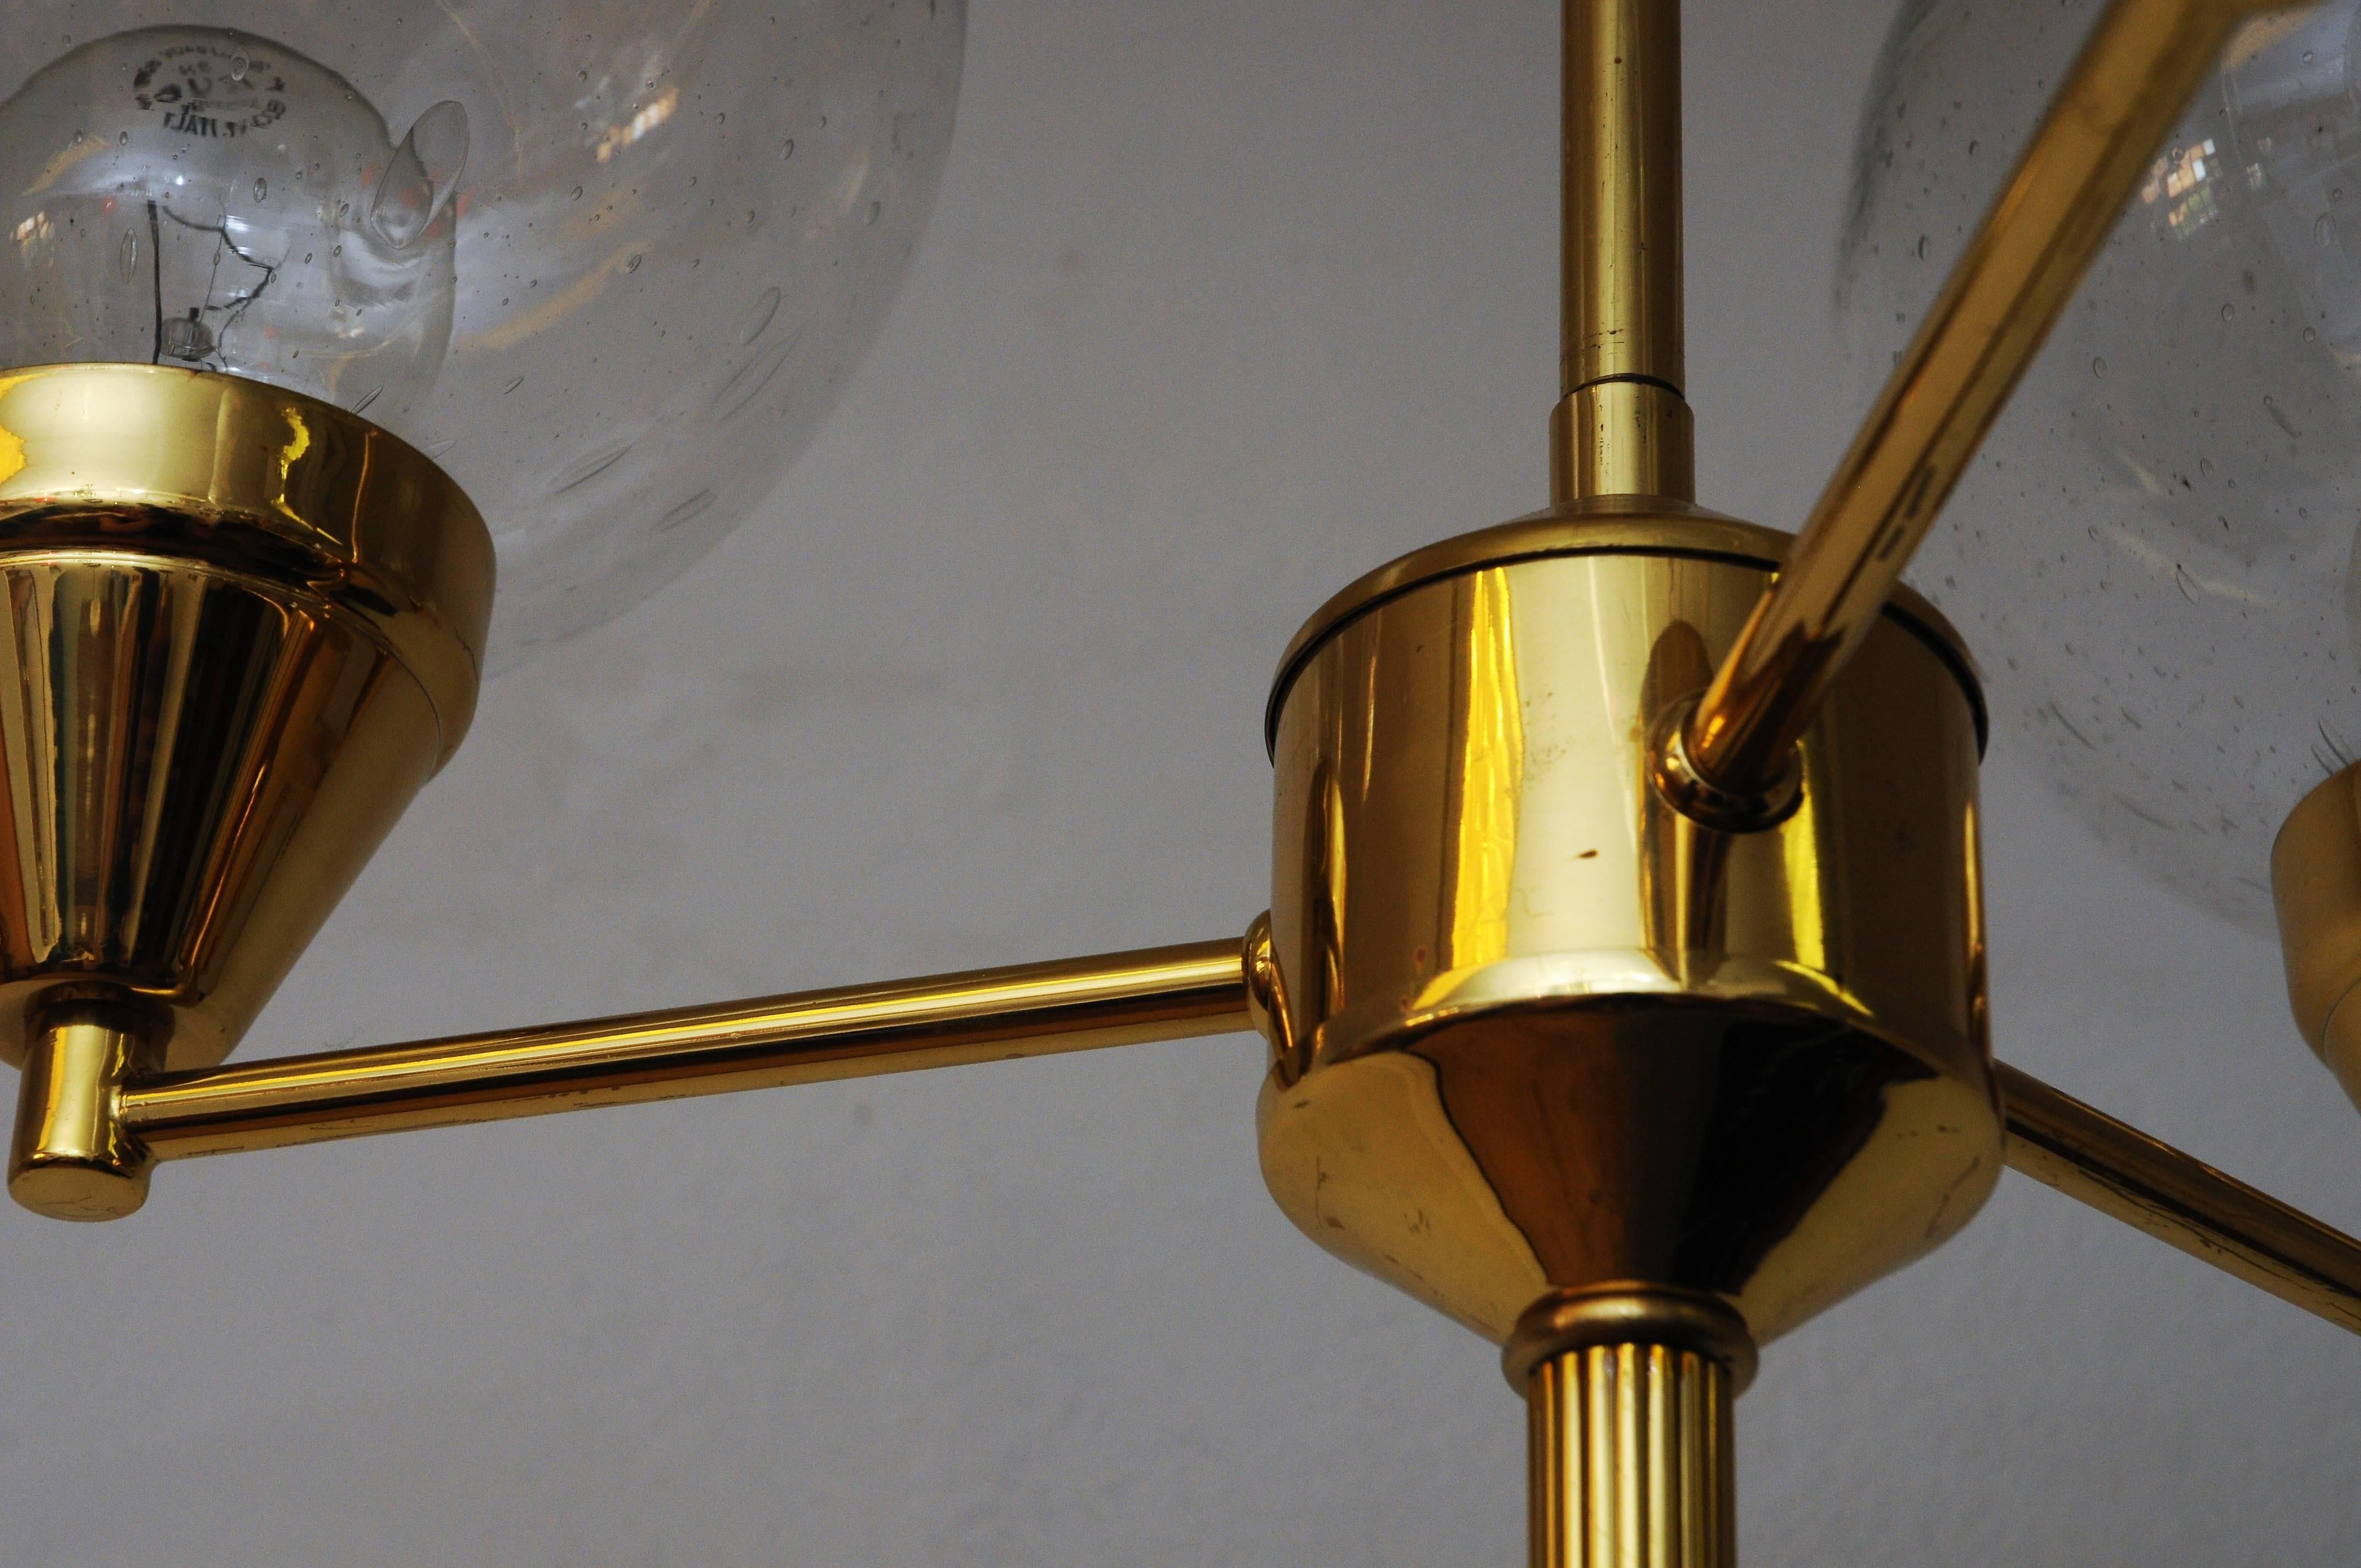 Midcentury Brass Ceiling Lamp with Three Clear Glass Domes 1960s, Sweden (Mitte des 20. Jahrhunderts)